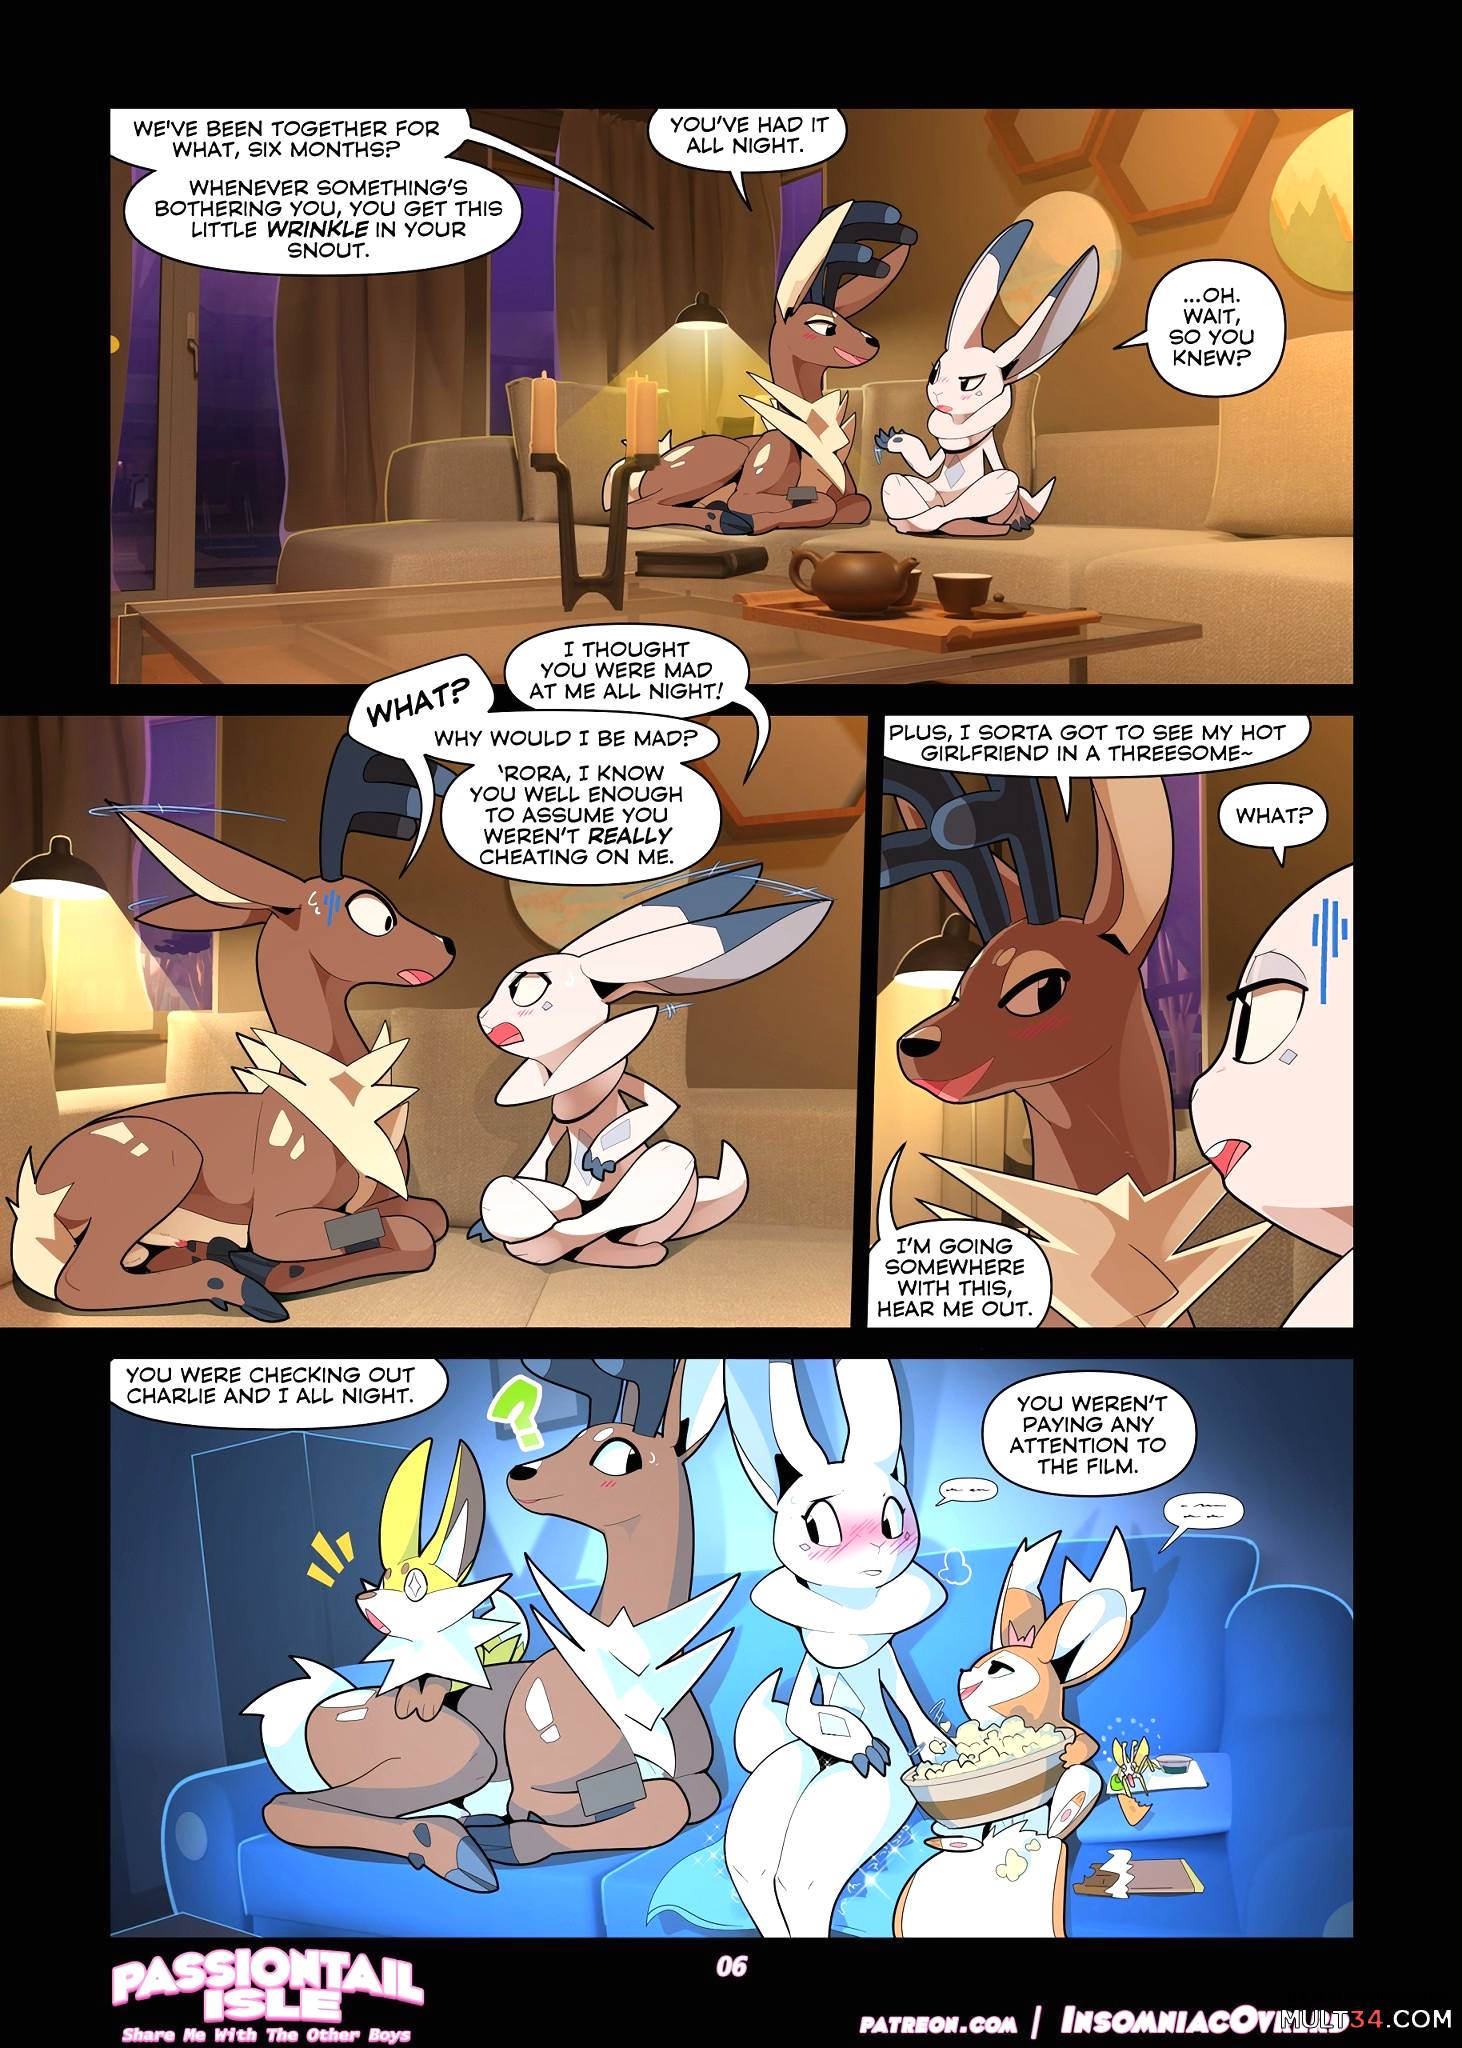 Passiontail Isle: Share Me With The Other Boys page 7